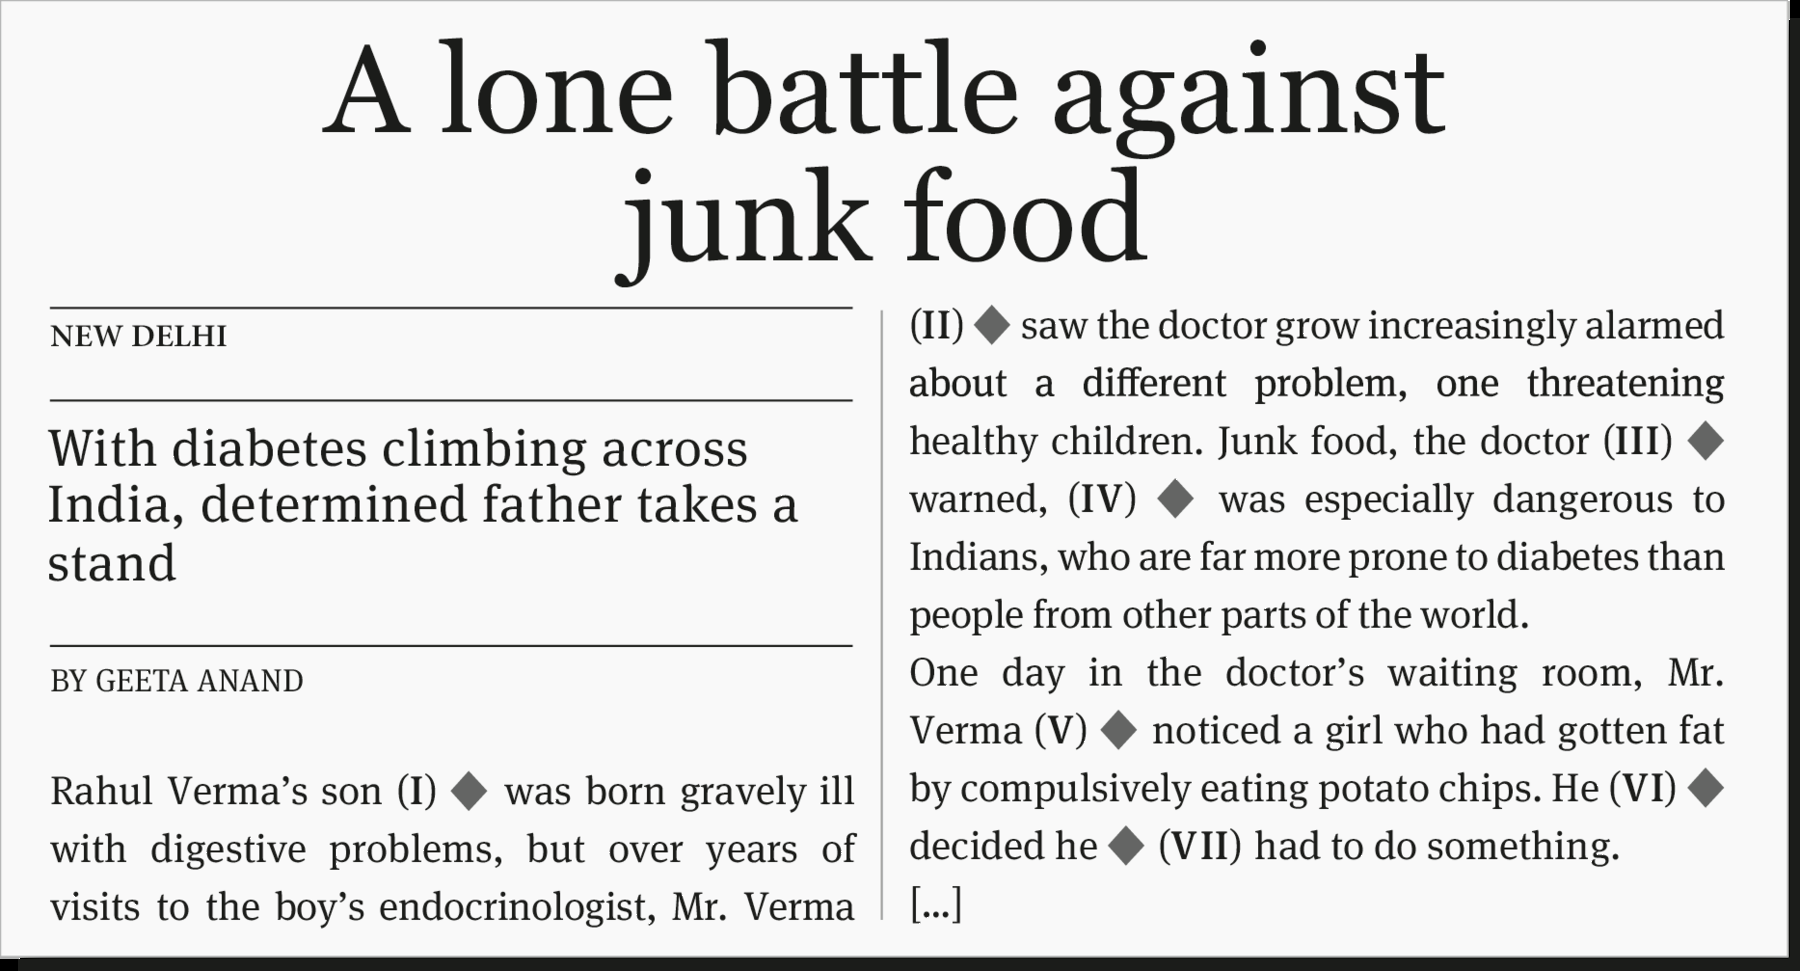 Notícia de jornal. fundo em cinza claro, com texto em preto: A lone battle against junk food. NEW DELHI. With diabetes climbing across India, determined father takes a stand. BY GEETA ANAND. Rahul Verma's son (one) (espaço para resposta) was born gravely ill with digestive problems, but over years of visits to the boy's endocrinologist, Mr. Verma (two) (espaço para resposta) saw the doctor grow increasingly alarmed about a different problem, one threatening healthy children. Junk food, the doctor (three) (espaço para resposta) warned (four) (espaço para resposta) was especially dangerous to Indians, who are far more prone to diabetes than people from other parts of the world. One day in the doctor's waiting room, Mr. Verma (five) (espaço para resposta) noticed a girl who had gotten fat by compulsively eating potato chips. He (six) (espaço para resposta) decided he (seven) (espaço para resposta) had to do something.